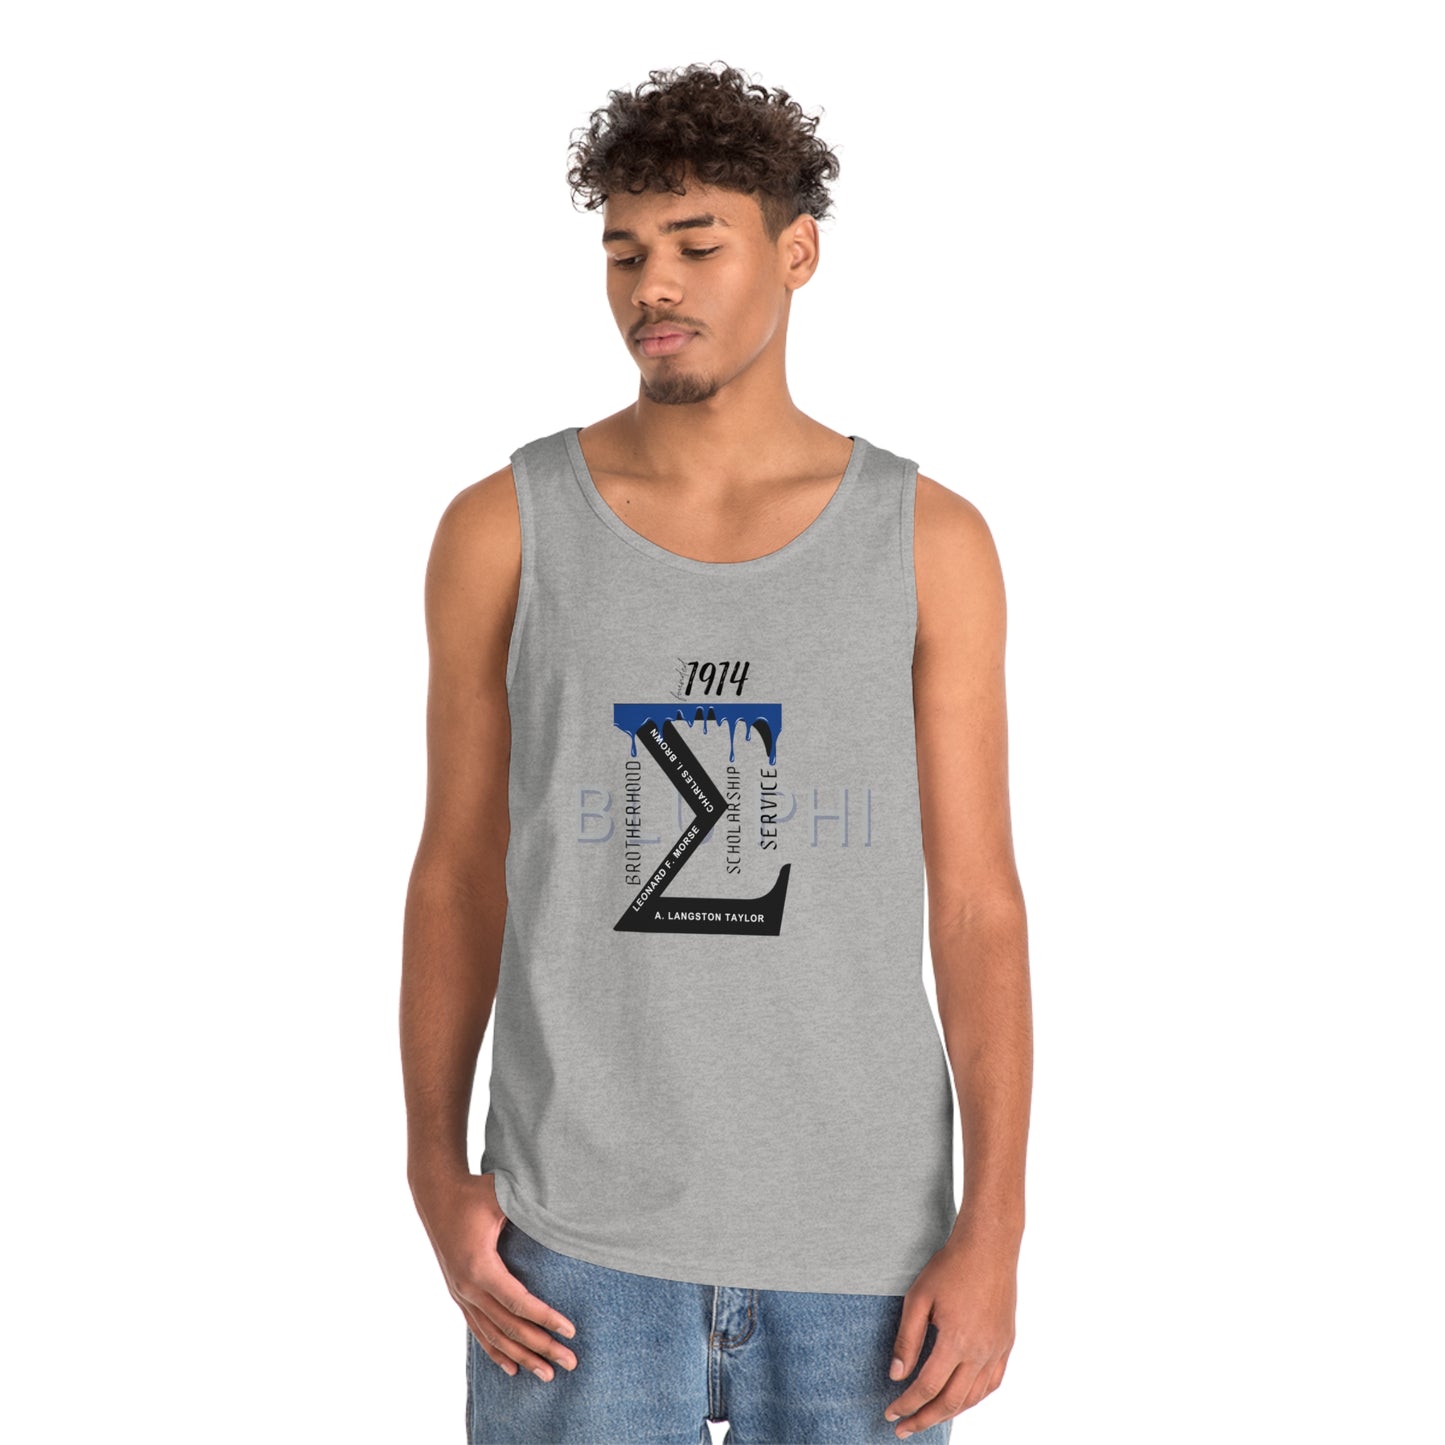 Sigma Founders Cotton Tank Top